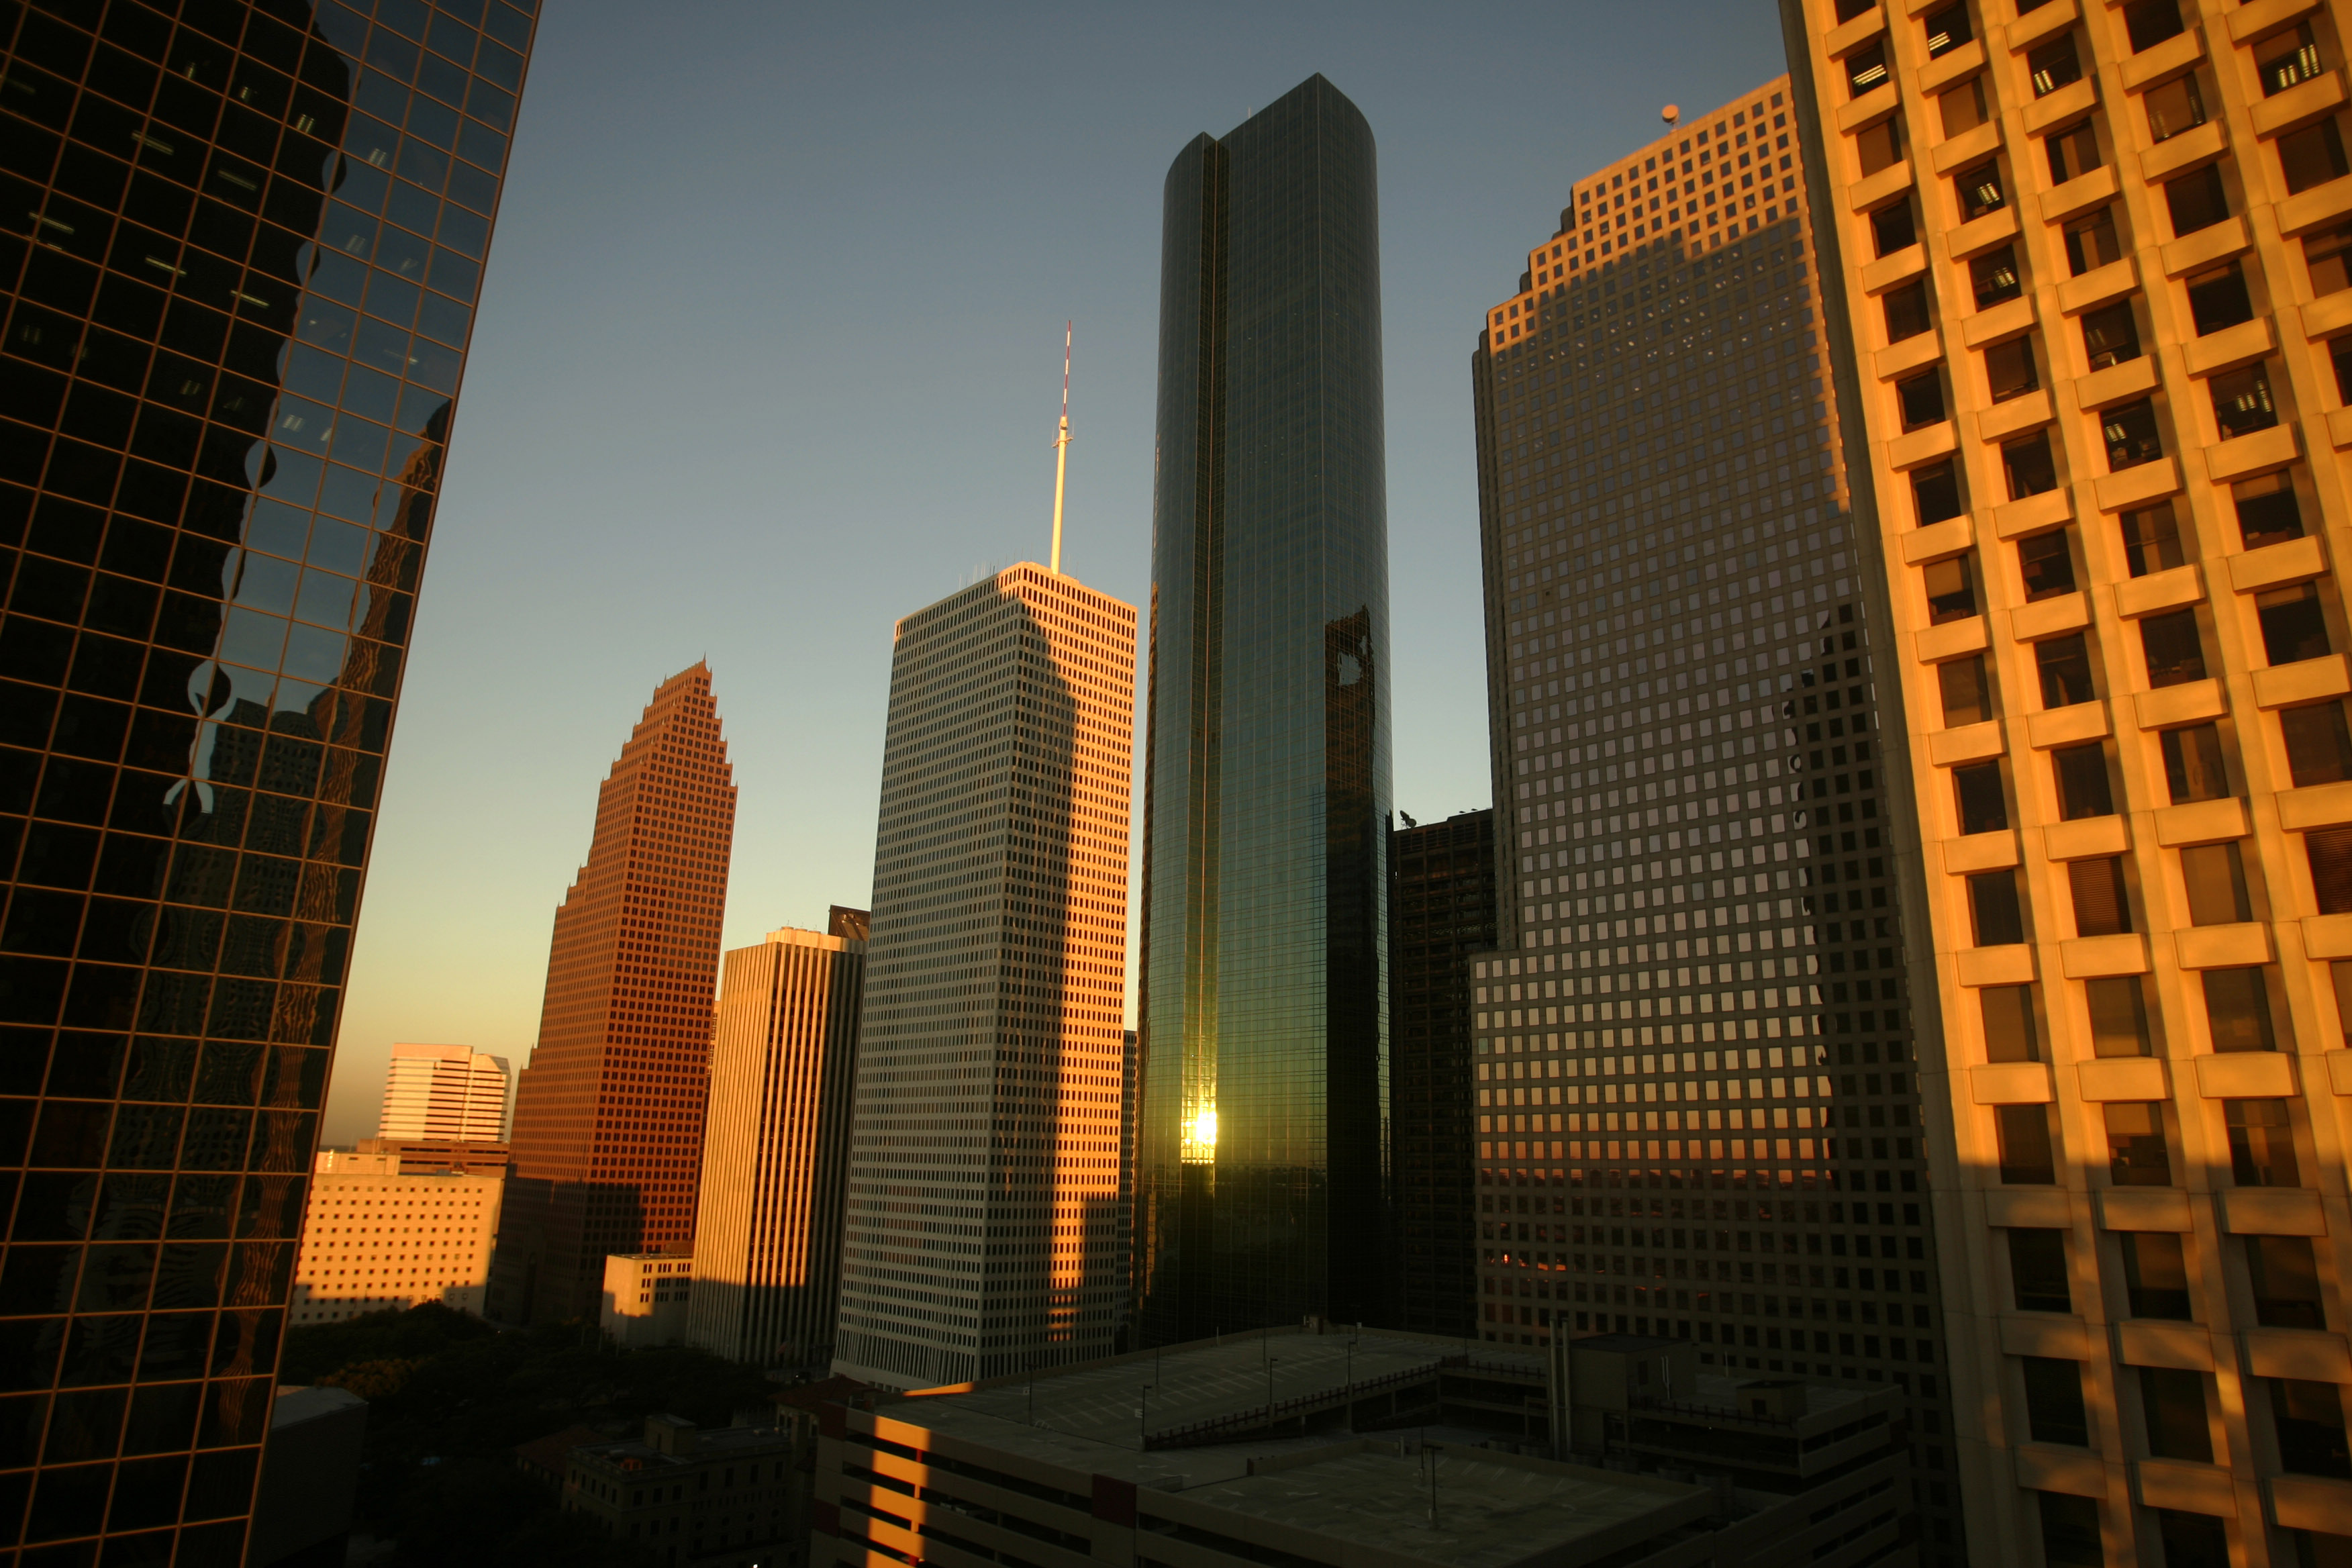 Sun reflects off downtown buildings in Houston.